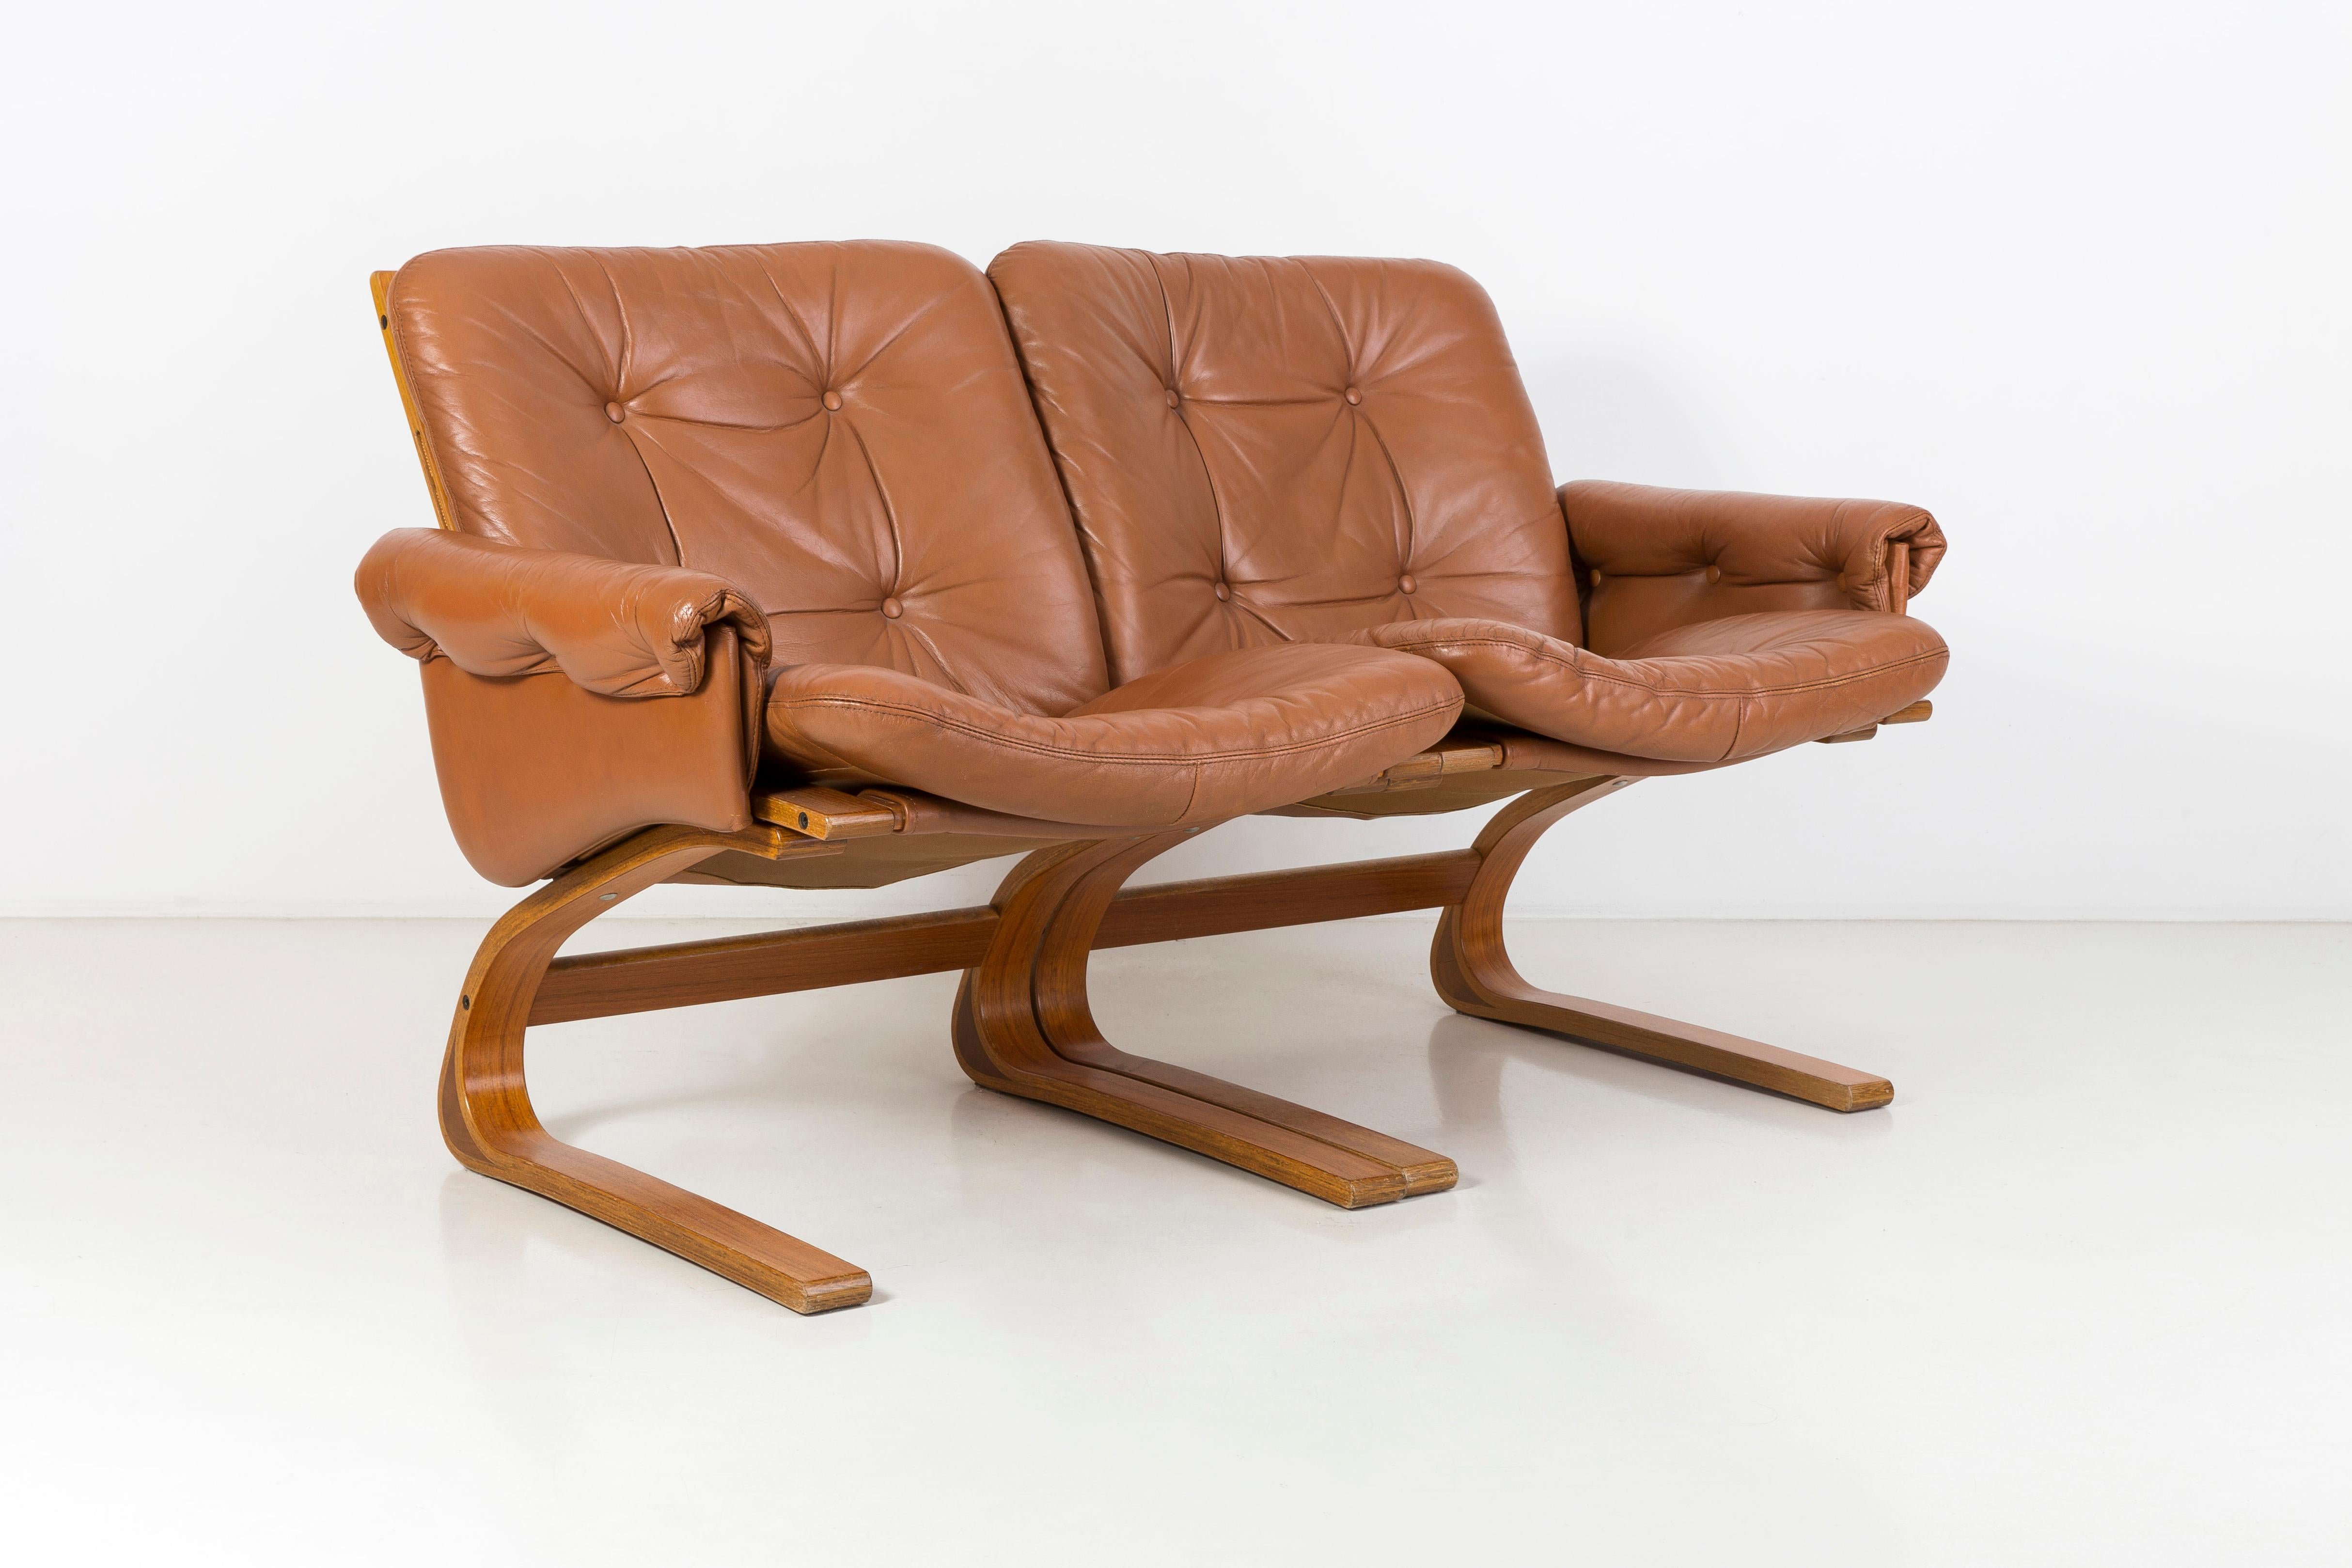 Norwegian Kengu sofa made by the Rybo Rykken manufacture, whose designers are Elsa & Nordahl Solheim. It was produced in 1976. The frame of the sofa is made of bent teak wood. The upholstery is original, made of genuine leather. This sofa is an icon